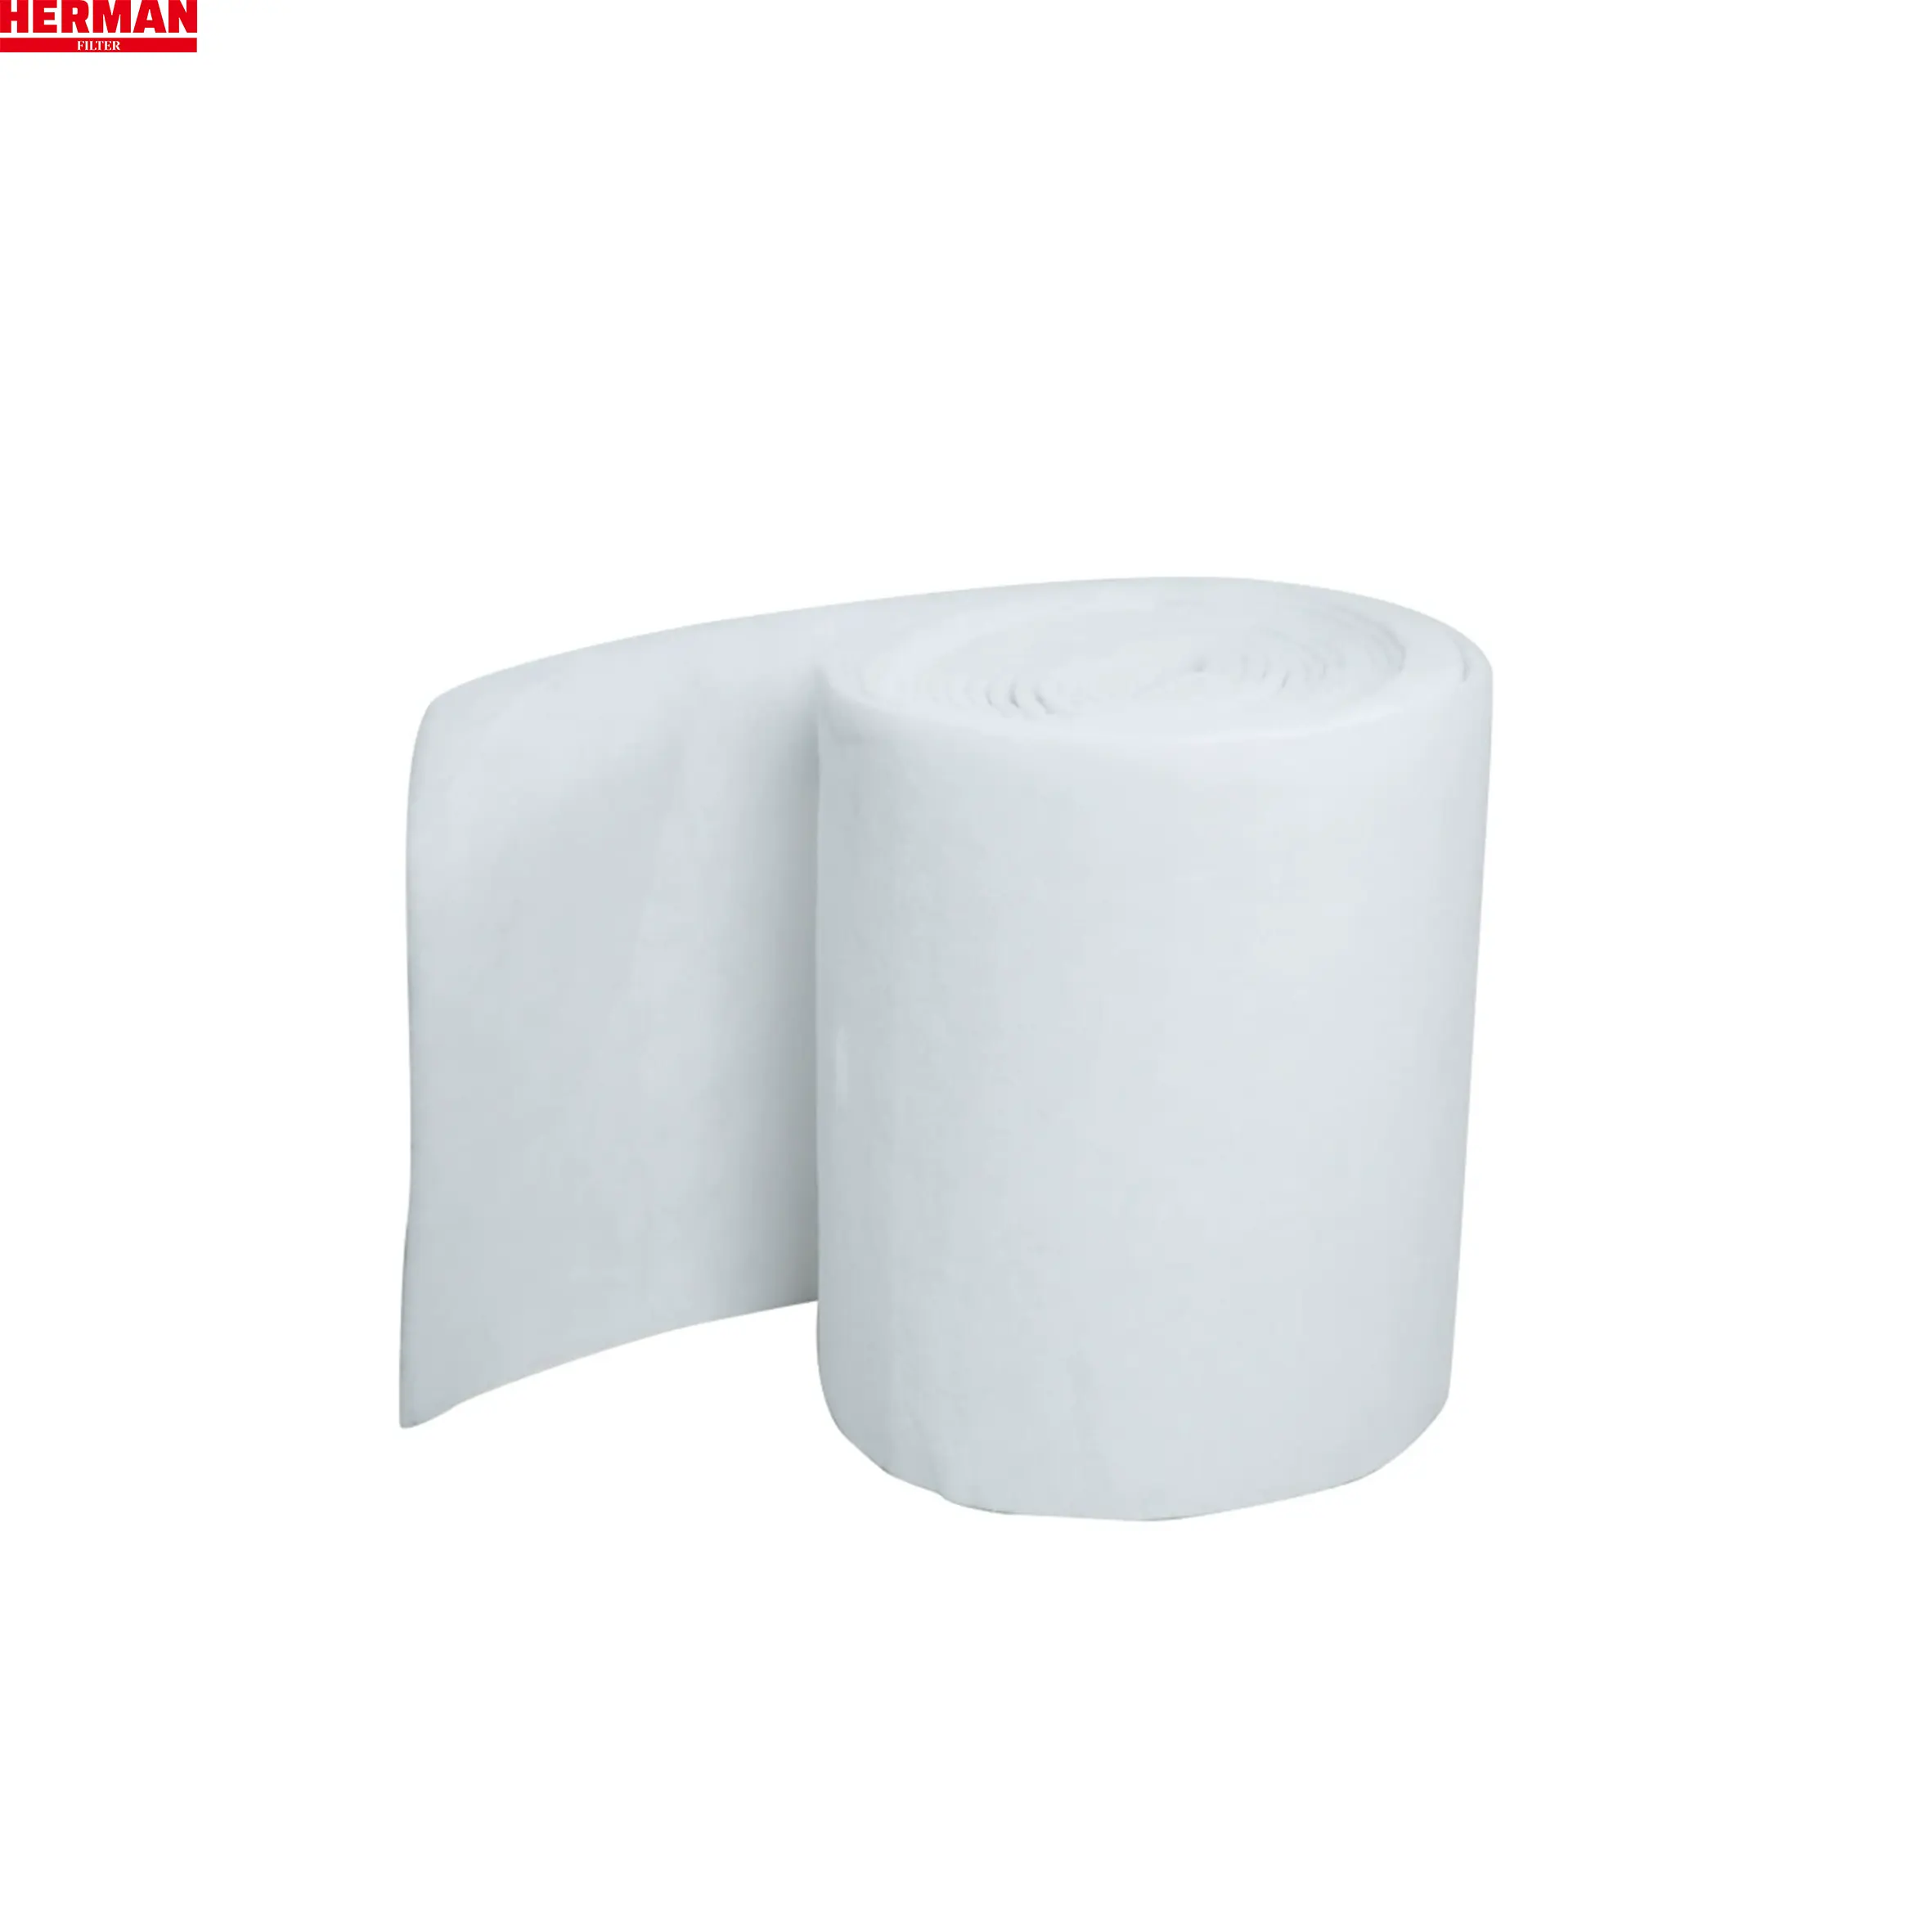 New G3/G4 Cotton Air Filter Media Roll Synthetic Fiber Panel Filter for Industrial Farm and Manufacturing Plant Use